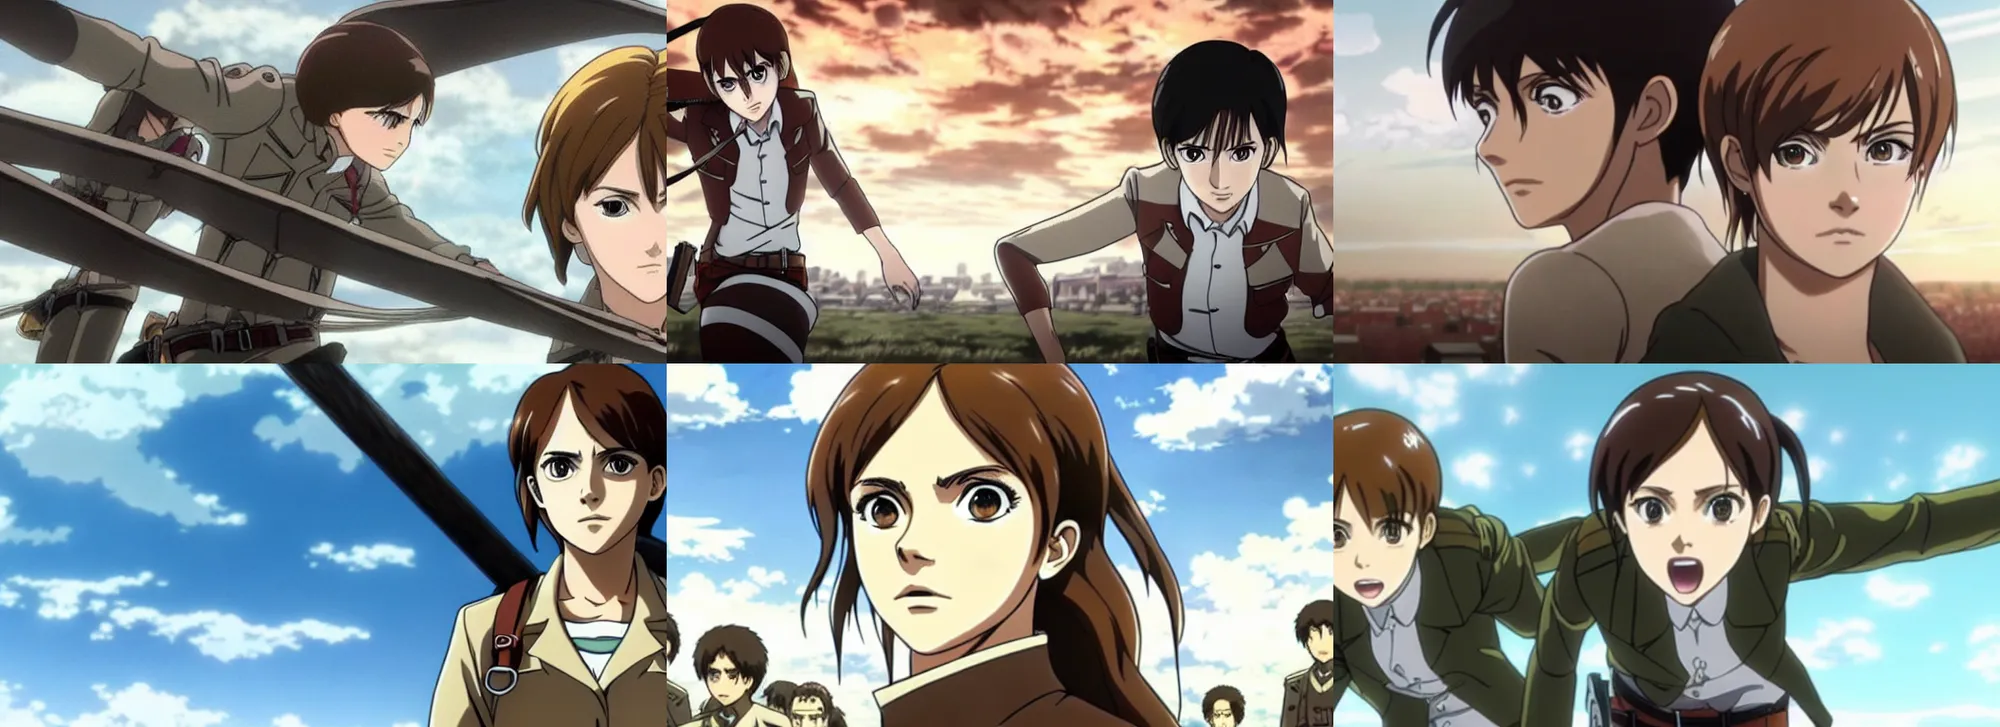 emma watson in attack on titan ( tv ), anime by wit, Stable Diffusion